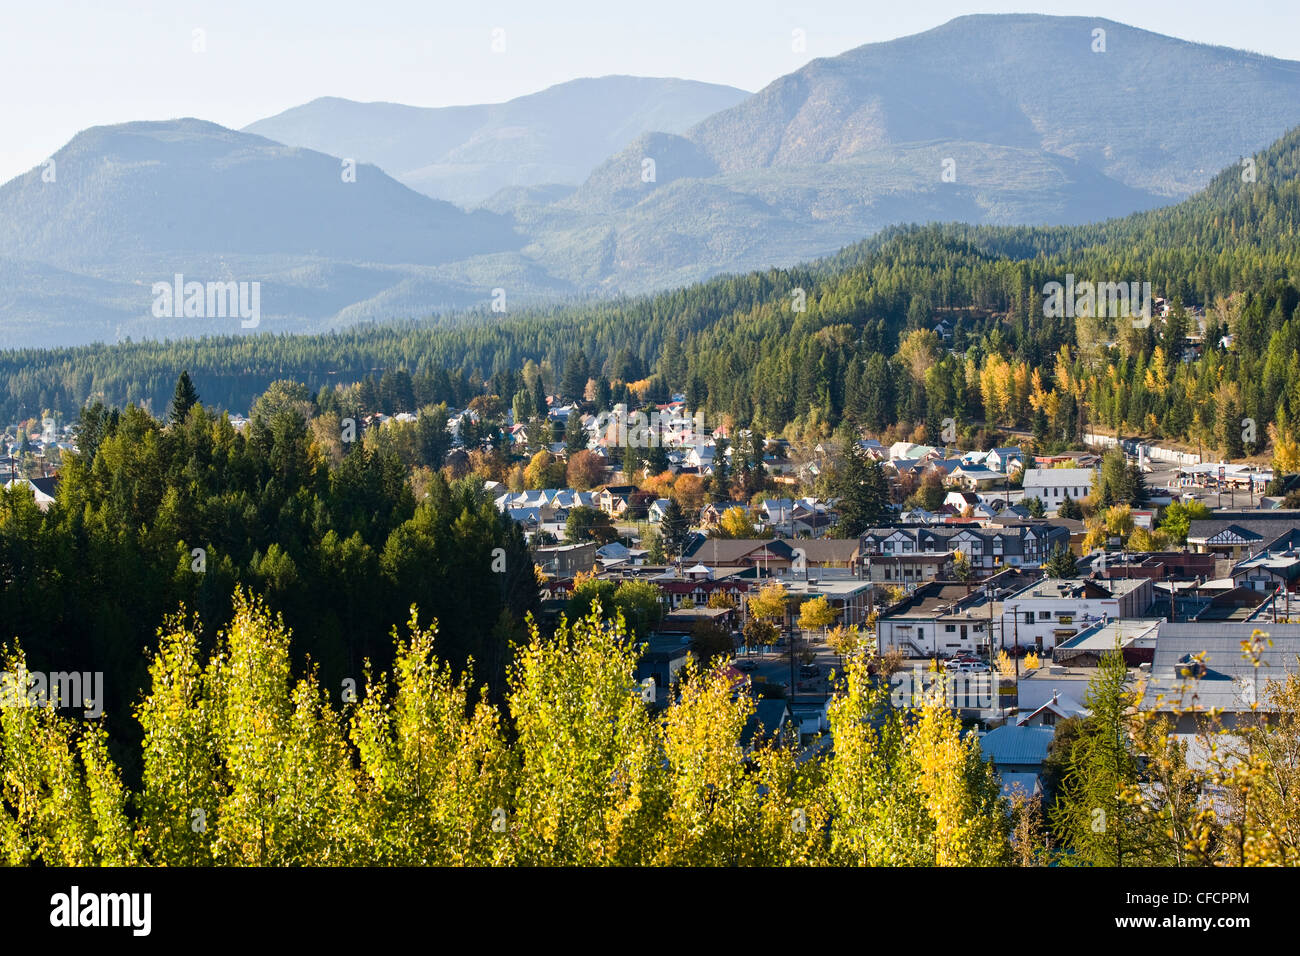 Elevated view of town of Kimberley, British Columbia, Canada Stock Photo